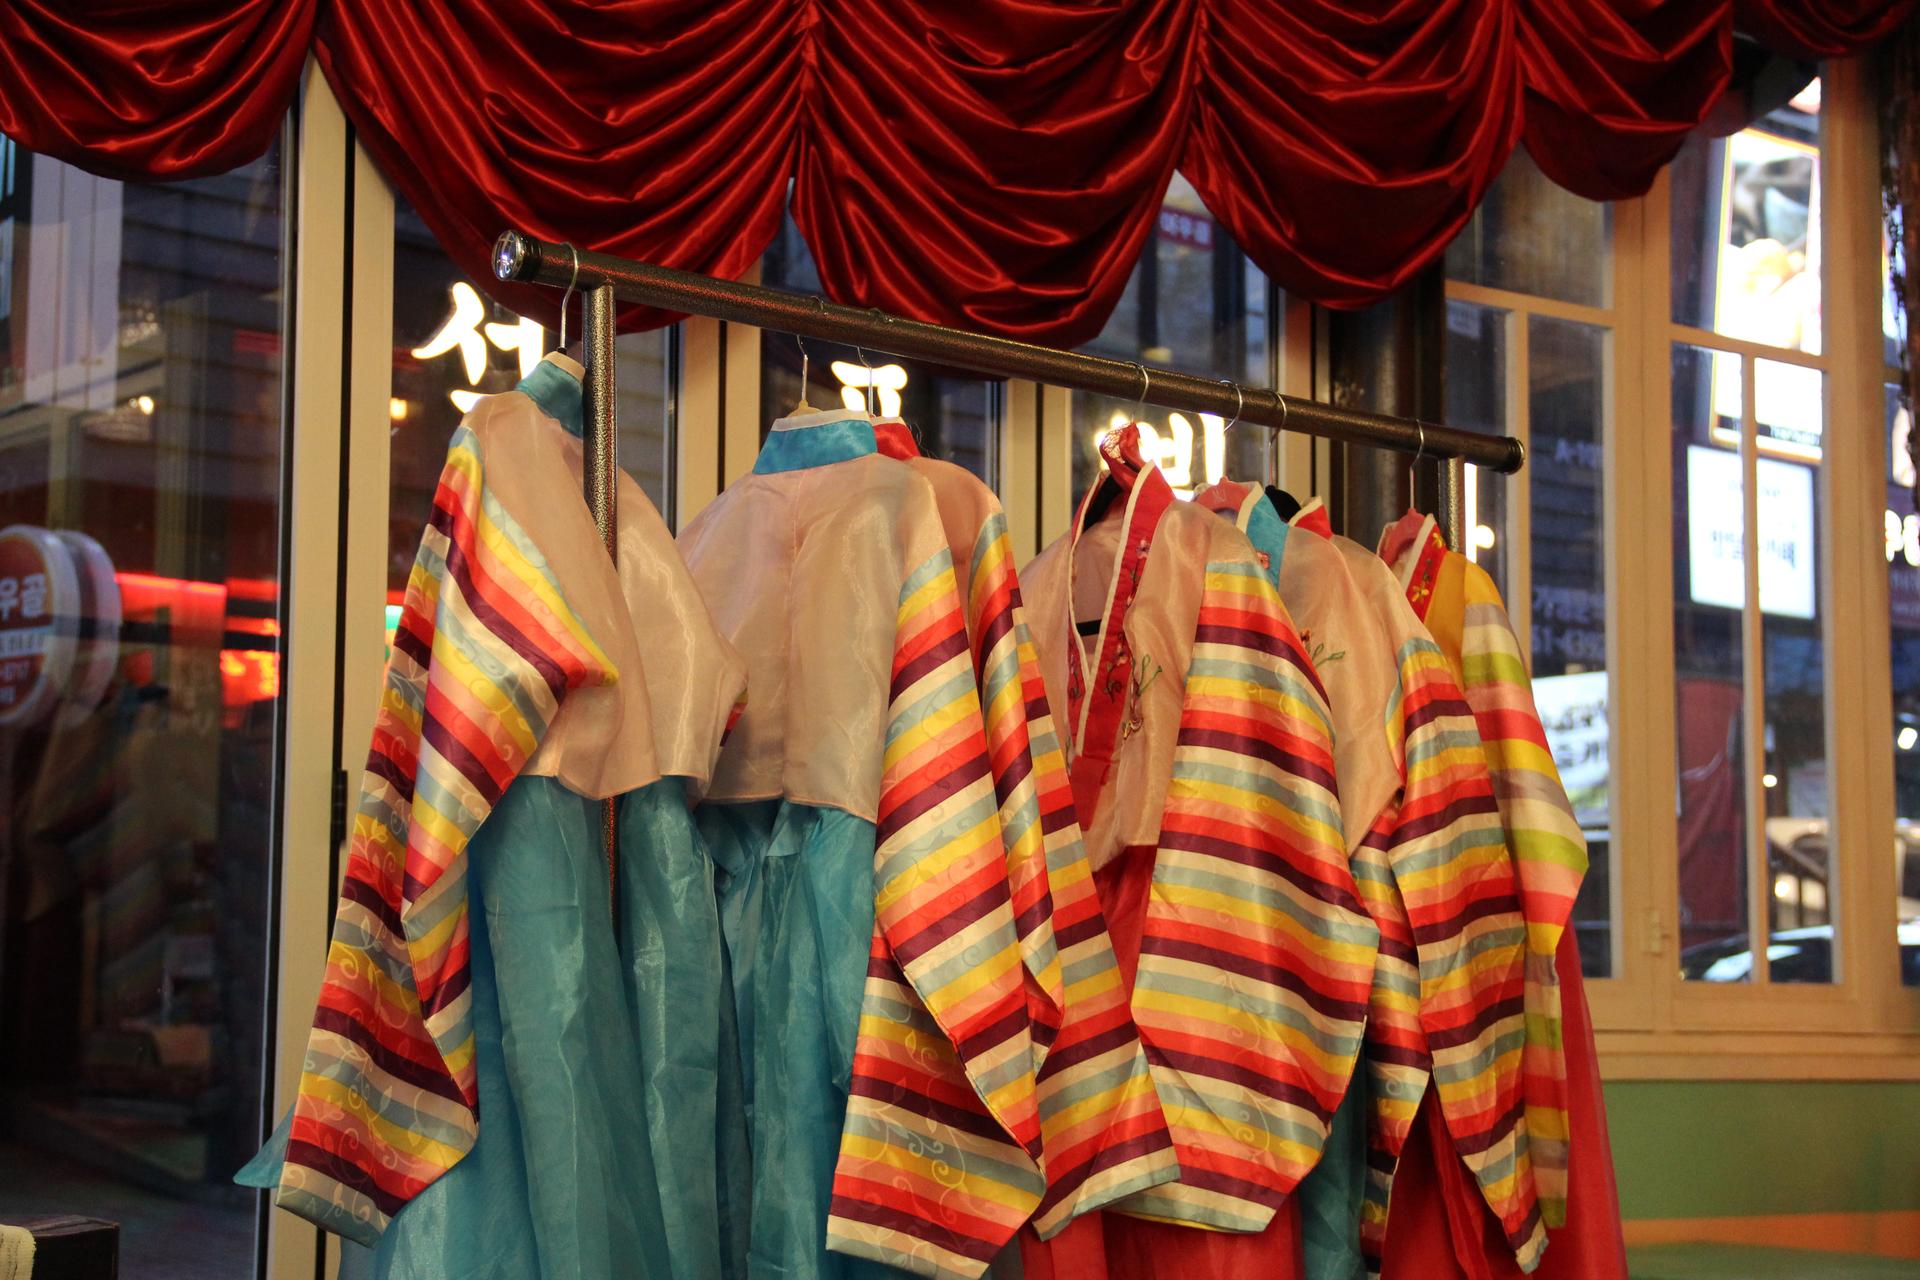 North Korean style hanbok, a traditional dress, are available for patrons to try on and take pictures in.